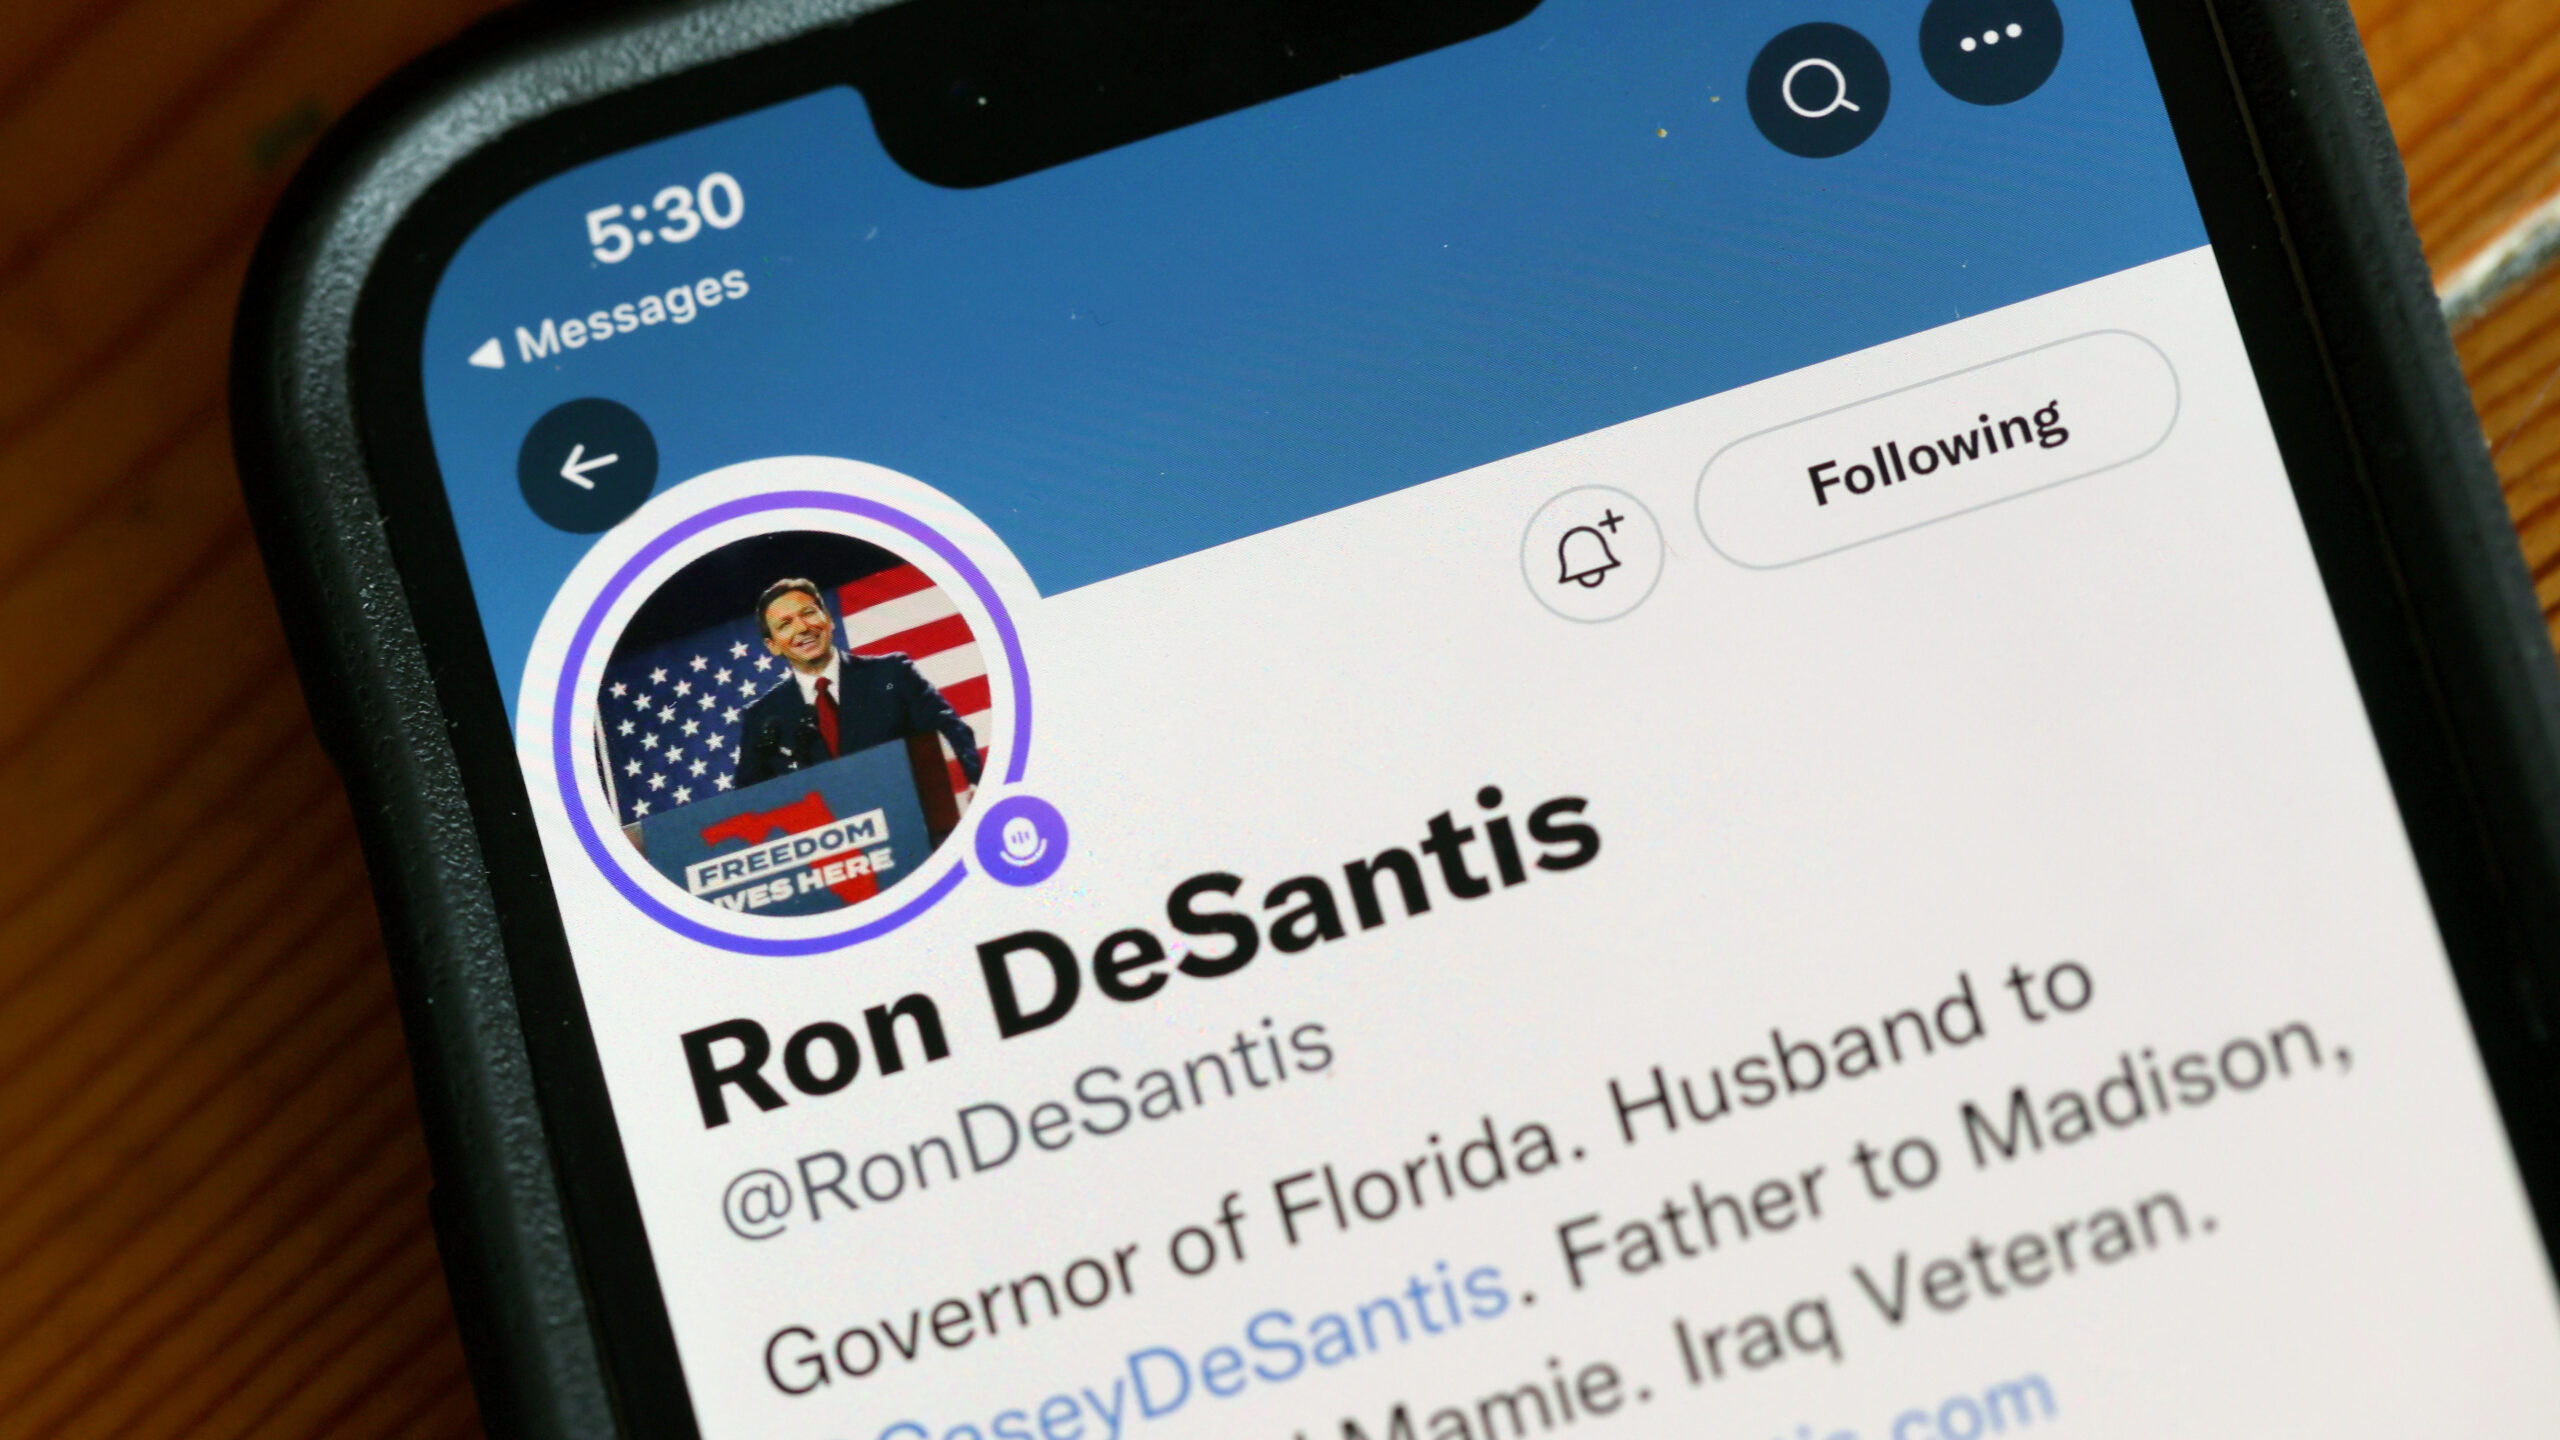 DeSantis’ Twitter Spaces event raised over  million in the first hour and was the biggest ever.